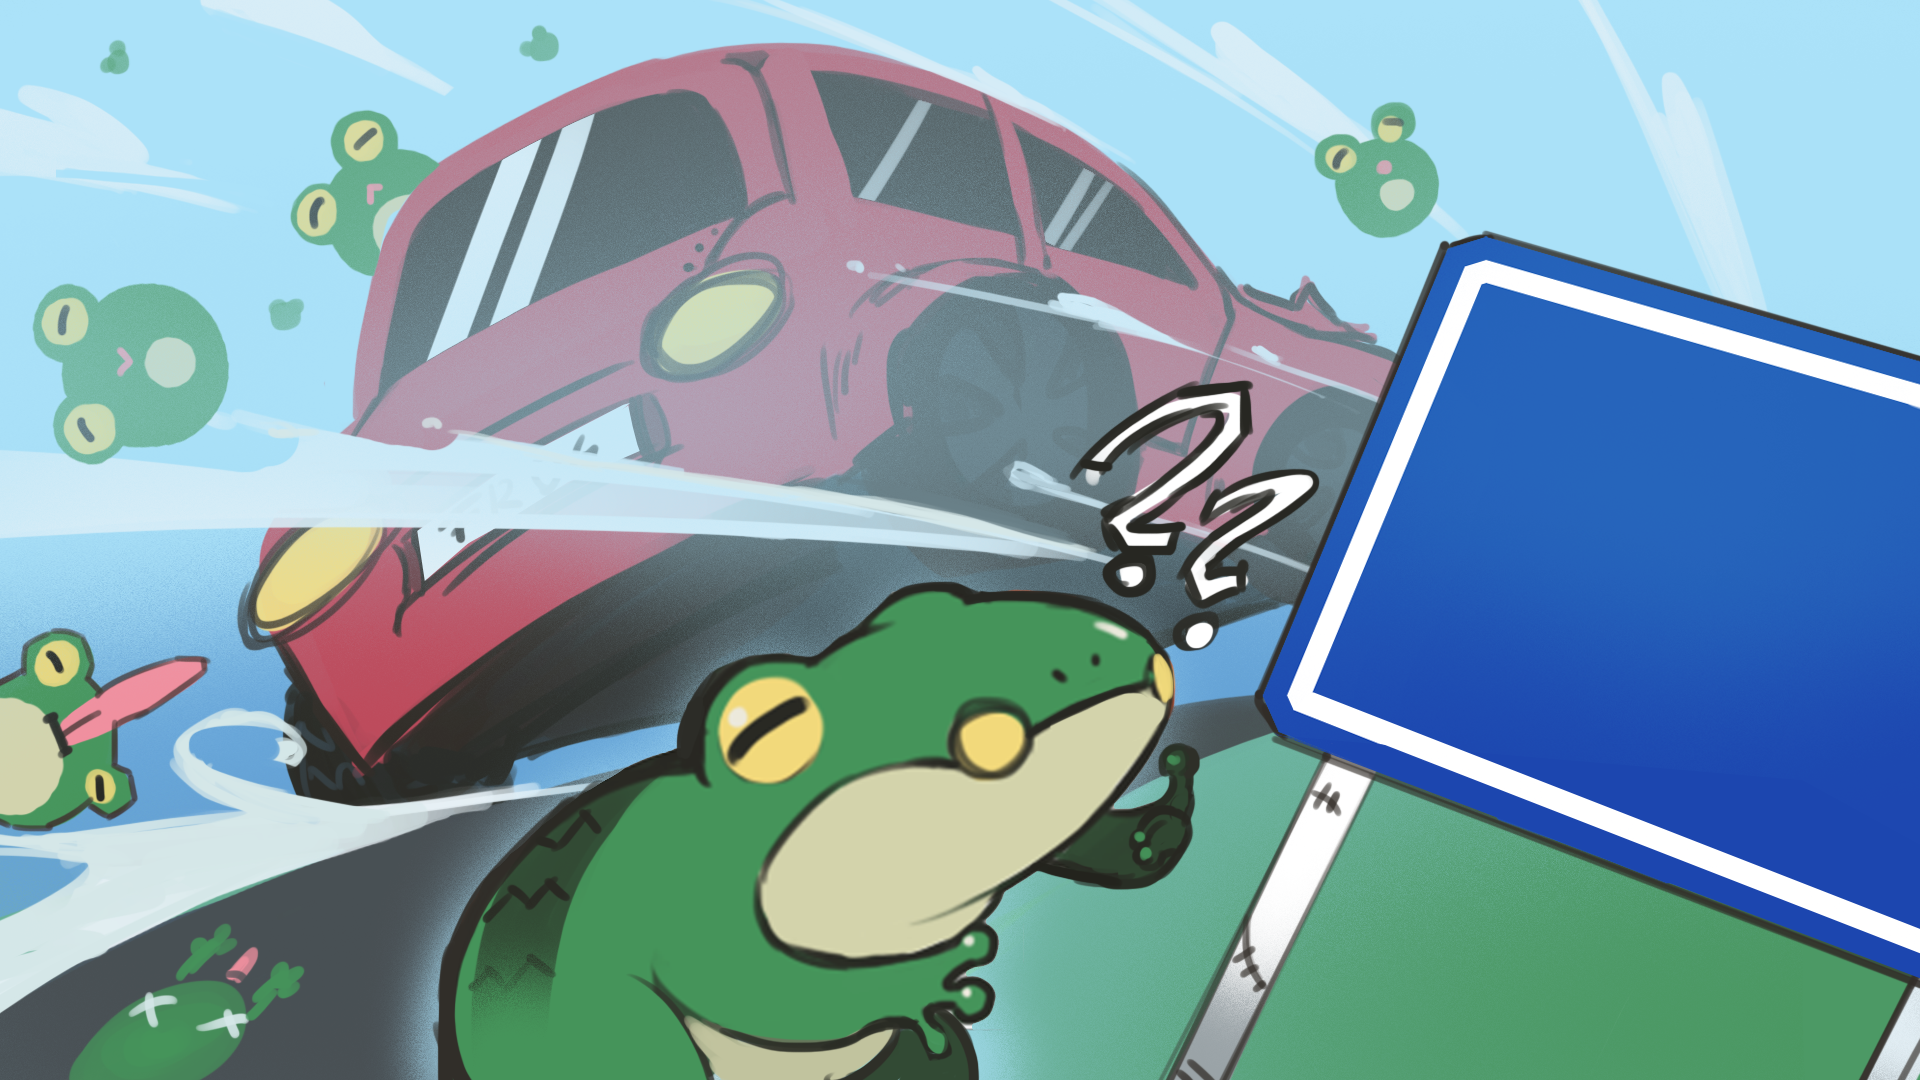 Why did the car cross the frog?